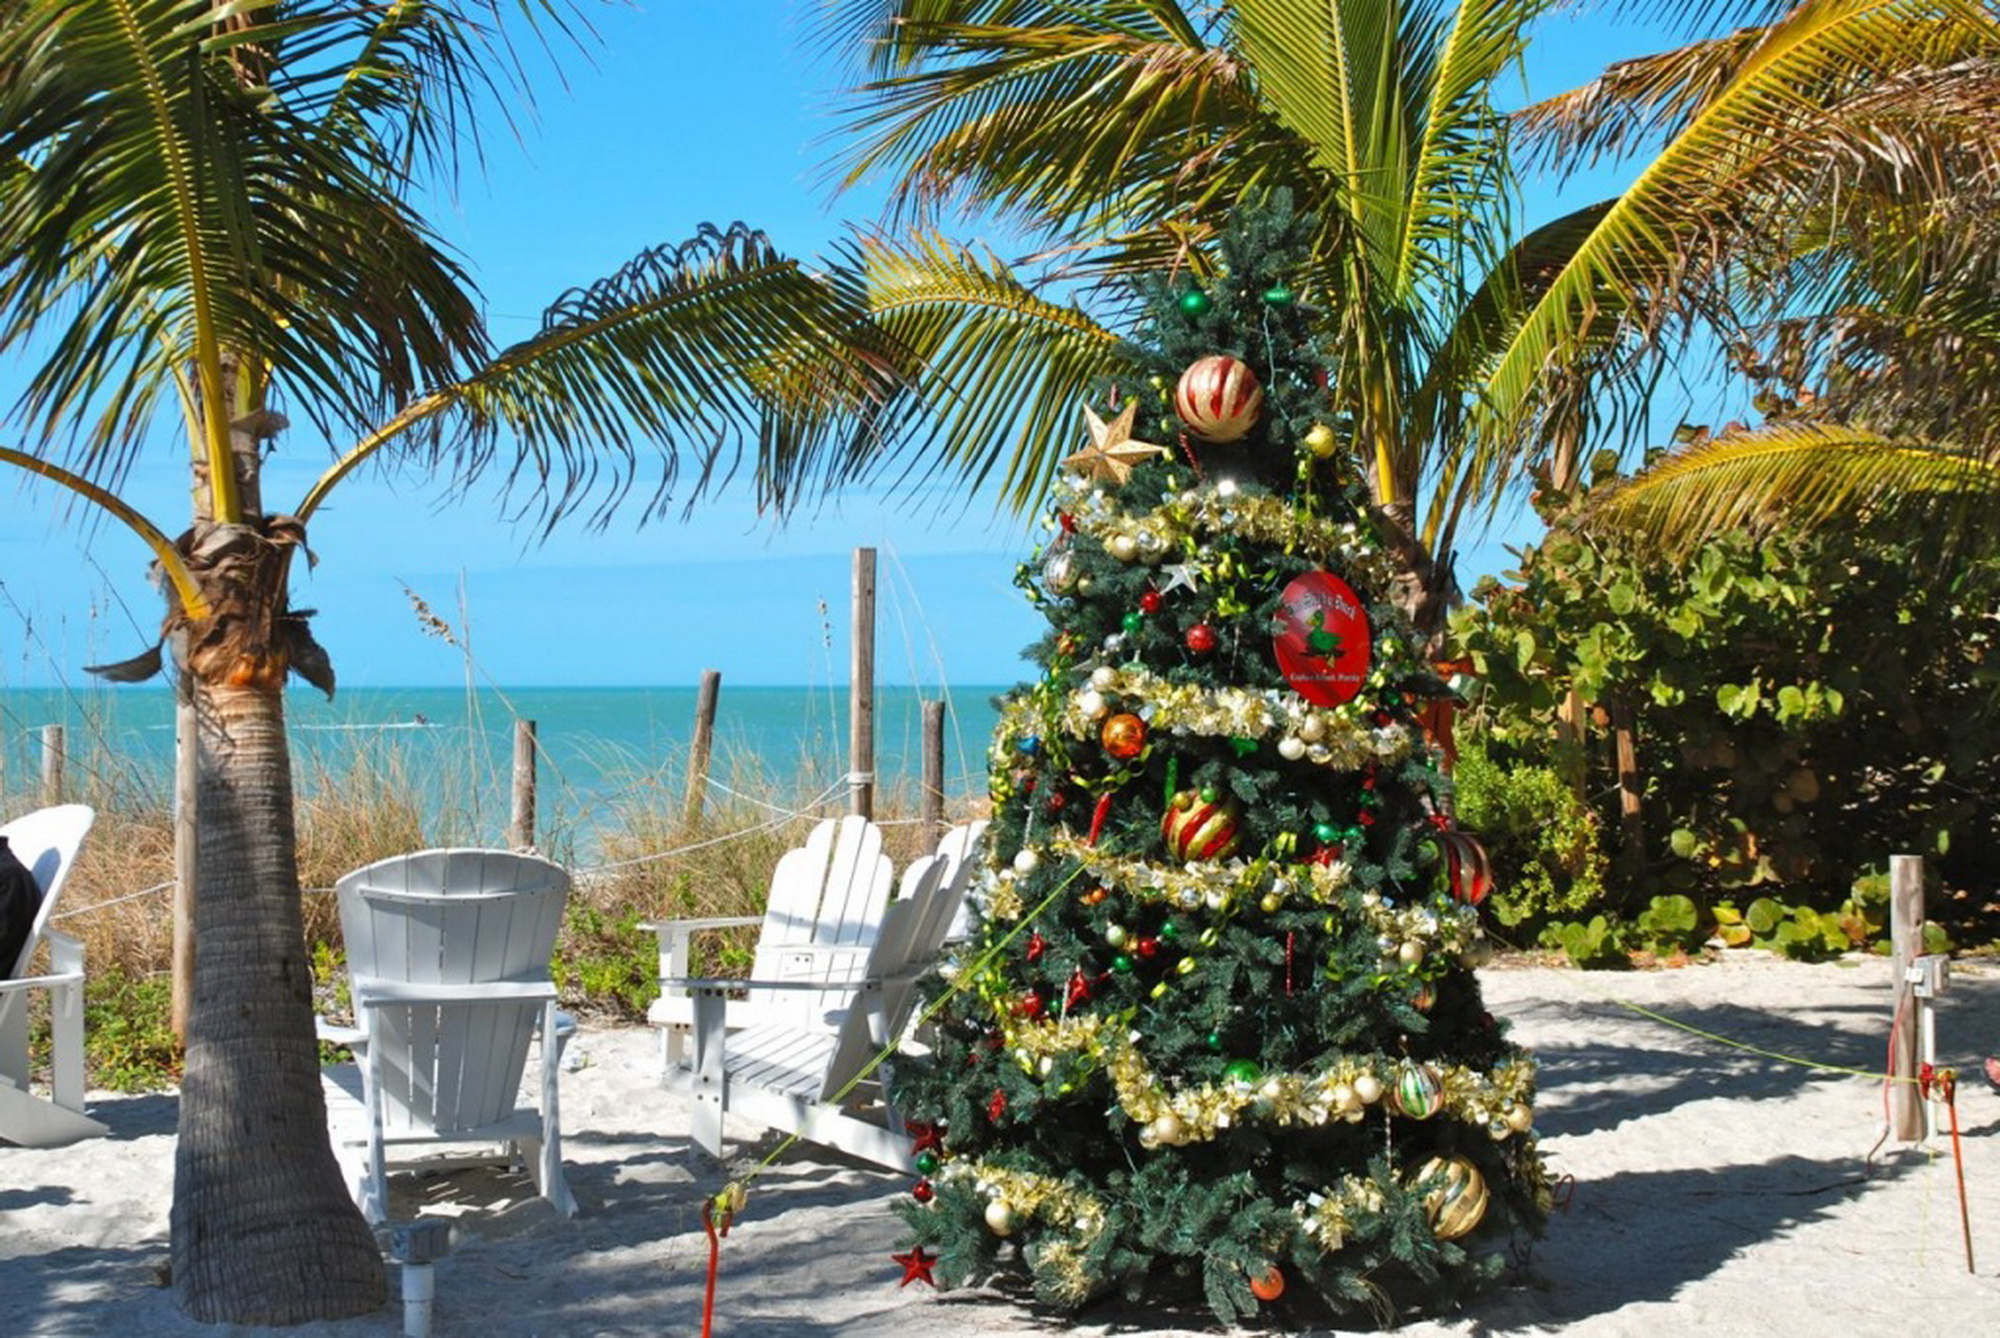 South Florida Vacation Rental Accommodations During The Holidays 11 St. Patrick's Day South Florida Injury Law Firm